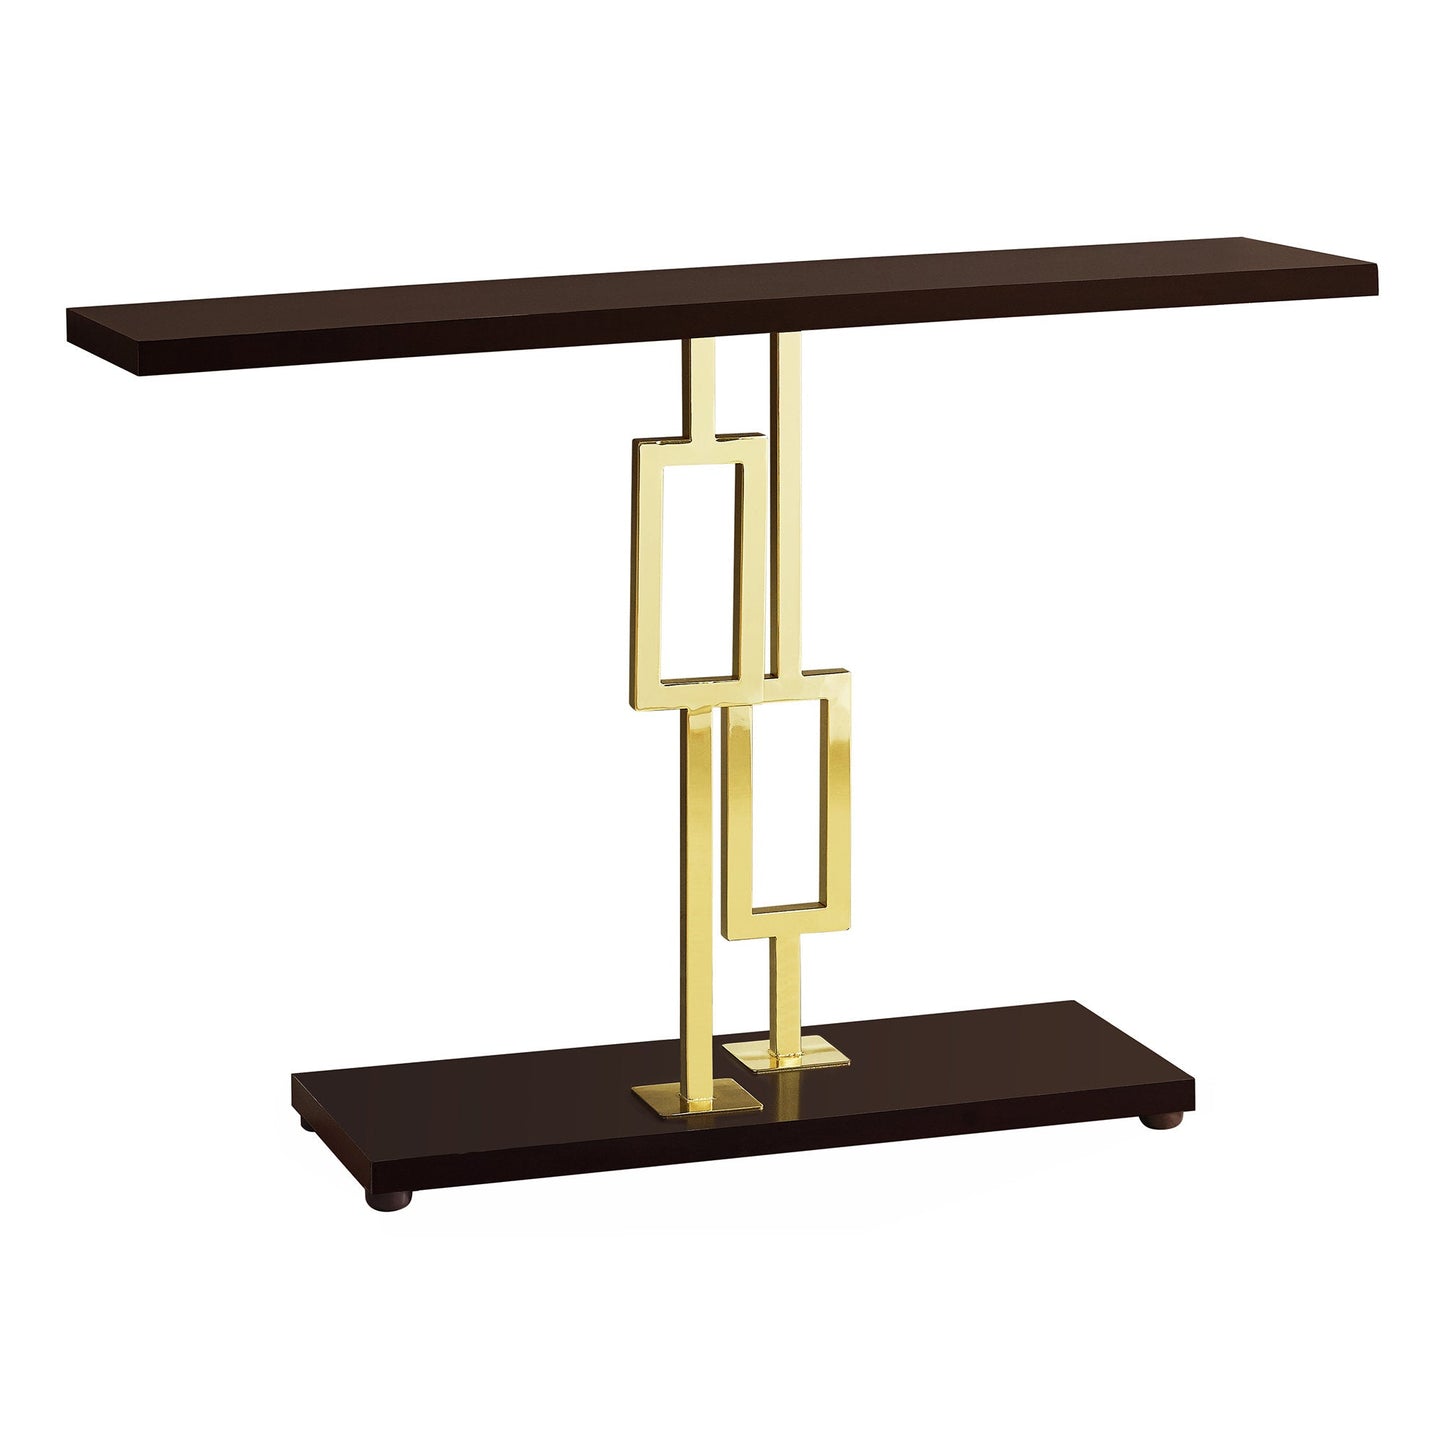 48"L Metal Bedroom Accent Console Table with Laminate Top